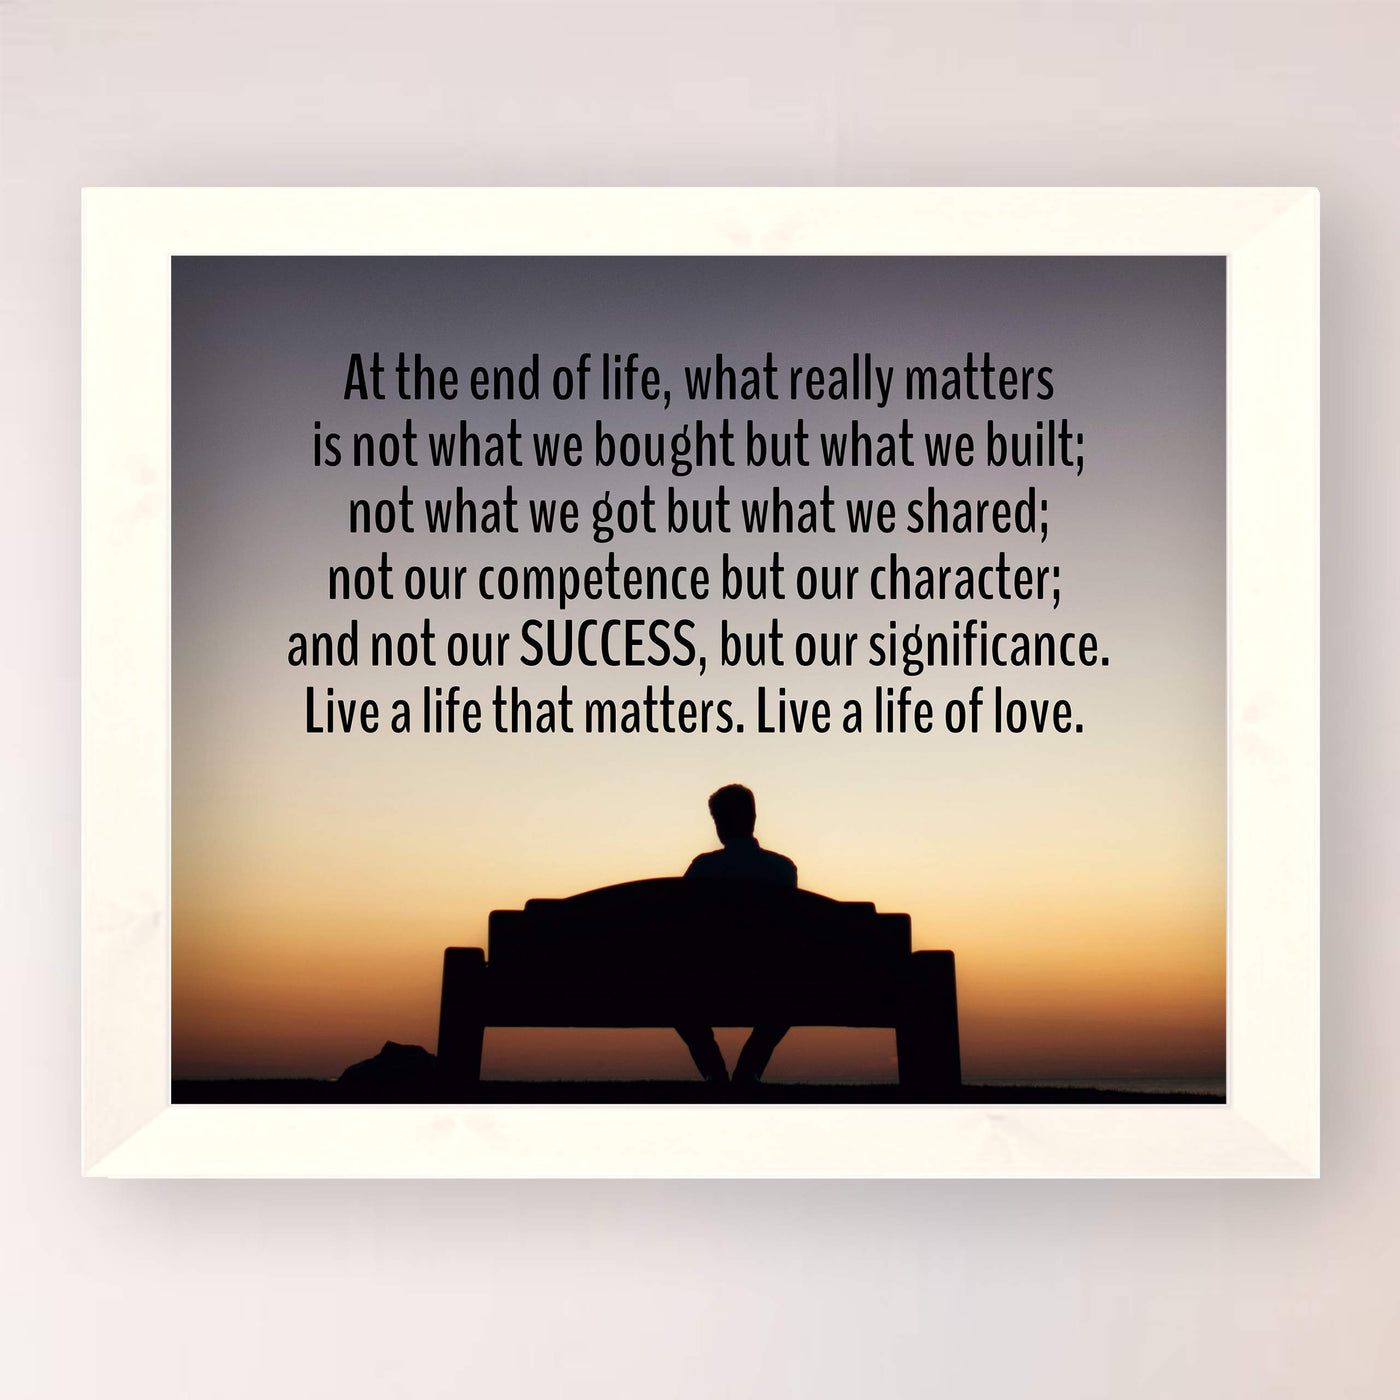 Live a Life That Matters-A Life of Love-Inspirational Quotes Wall Art -10 x 8" Motivational Sunset Poster Print-Ready to Frame. Positive Home-Office-Studio-Dorm Decor. Great Advice for All!